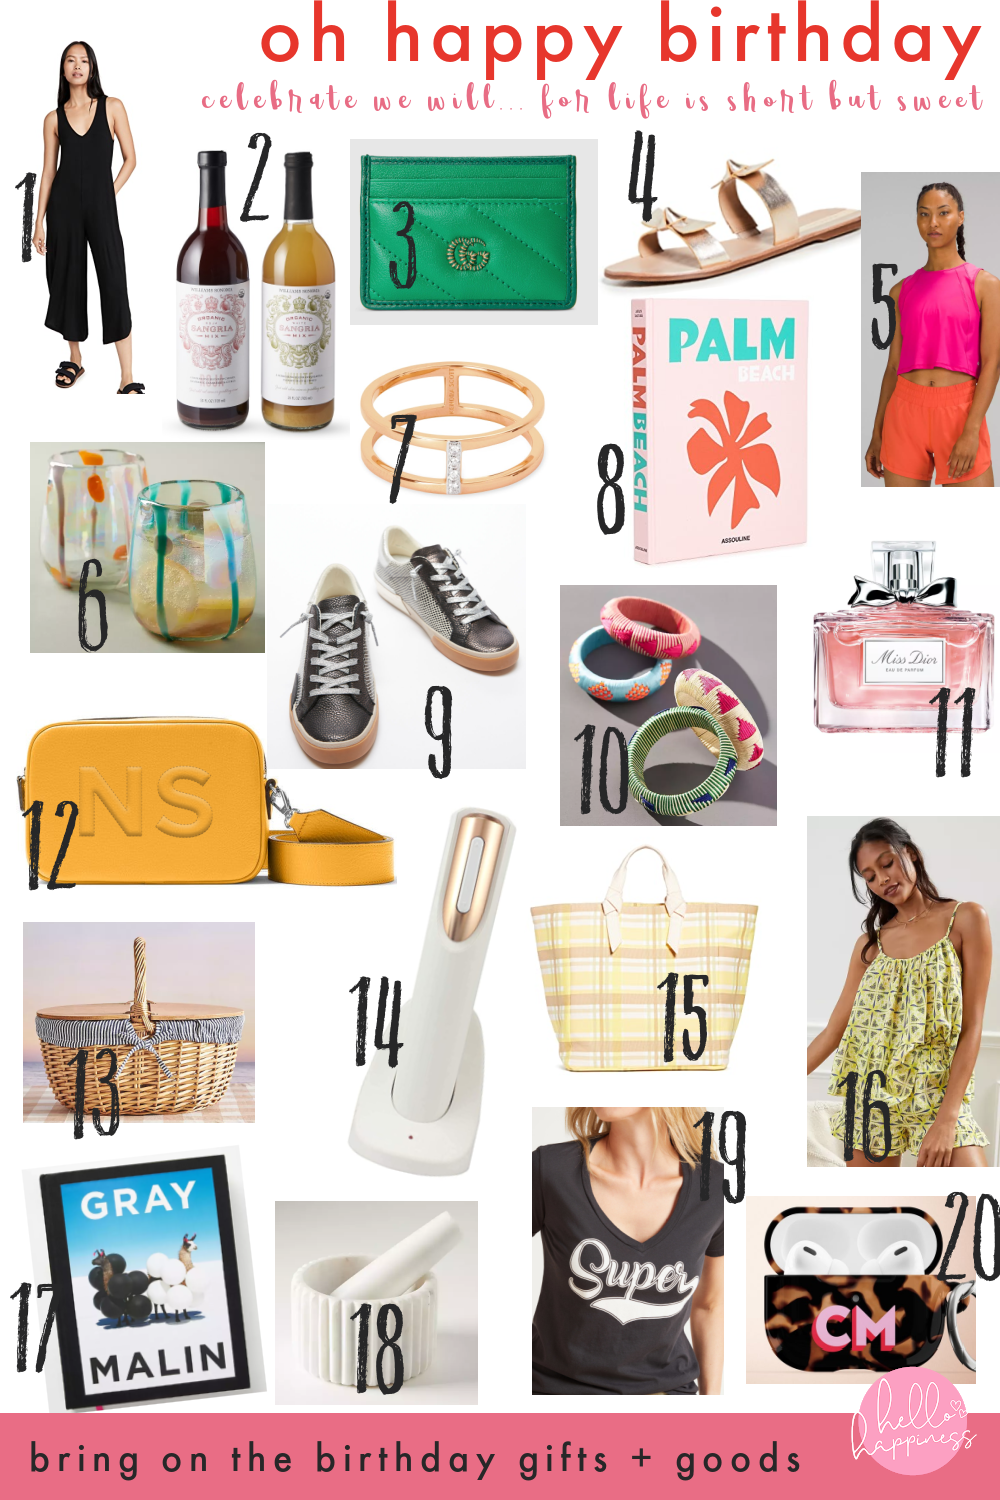 Birthday Wishlist by popular Nashville life and style blog, Hello Happiness: collage image of a starlette jumpsuit, summer sangria set, green + emerald Marmont card case, double bow gold sandal, pink crop sculpt tank, isadora glass set, Waylon rose gold band, palm beach coffee table book, zina metallic sneaker, woven patterned bangle bracelet, miss dior perfume, double zip camera bag in yellow, countryside picnic basket, electric wine opener, mad about plaid tote, beauty ruffled short set, gray Malin book, marble mortar and pestle set, super v-neck tee, and monogram AirPod pro case. 